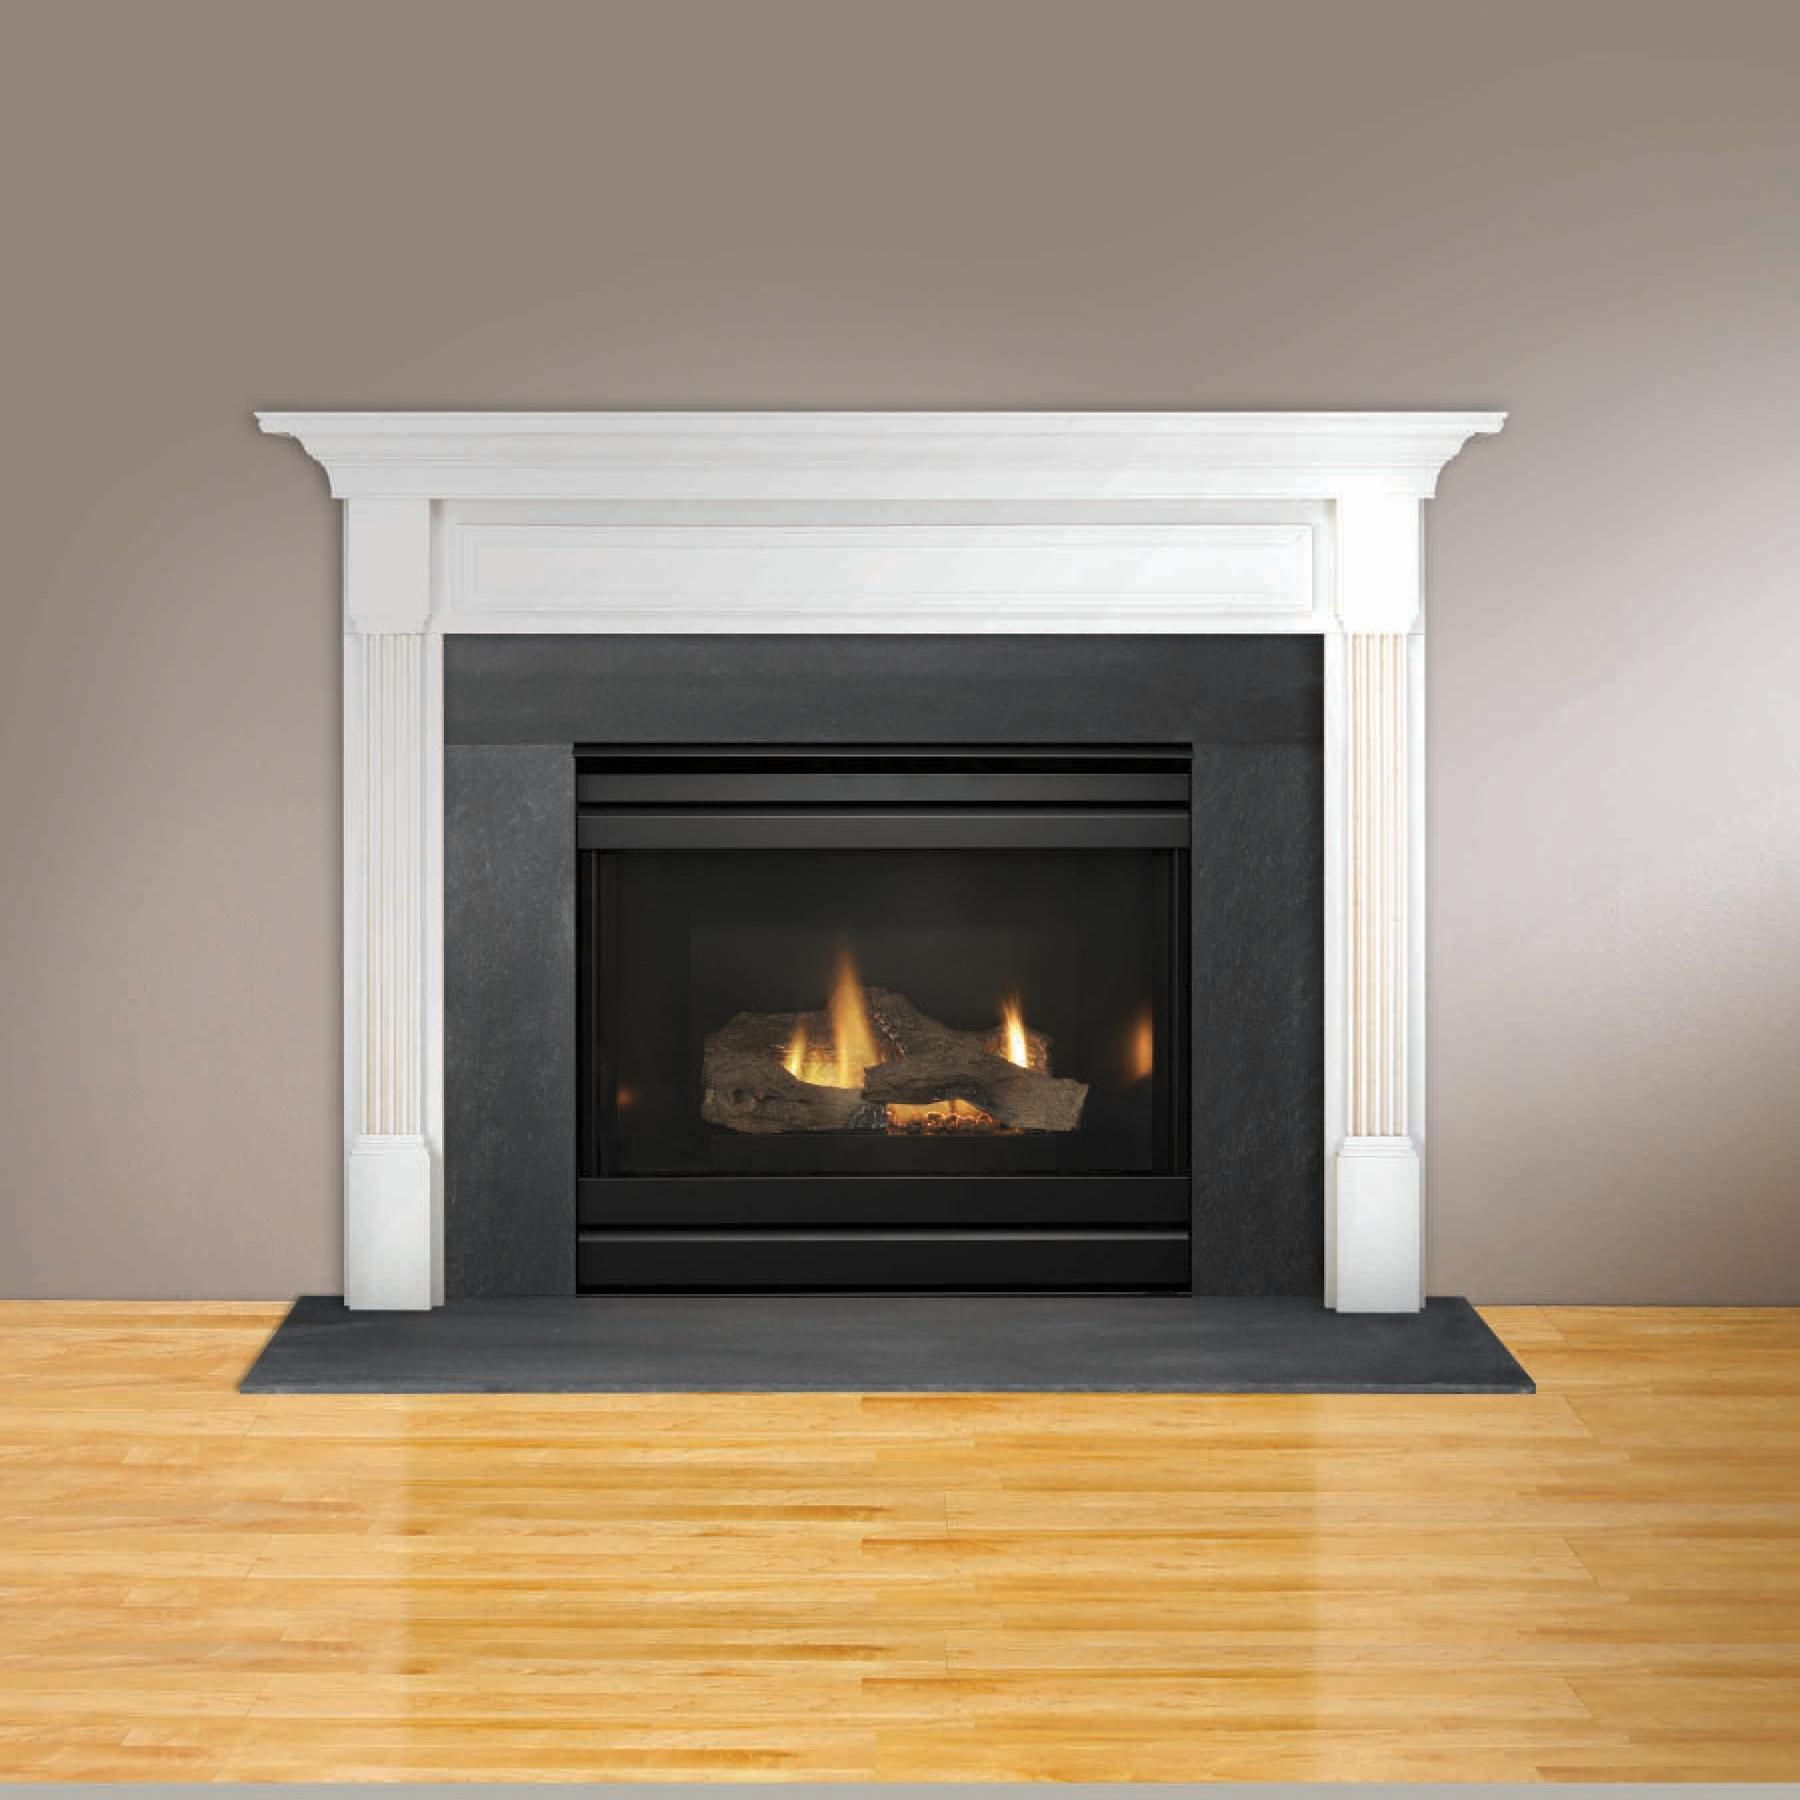 Hearth and Home Technologies Direct Vent Gas Fireplaces